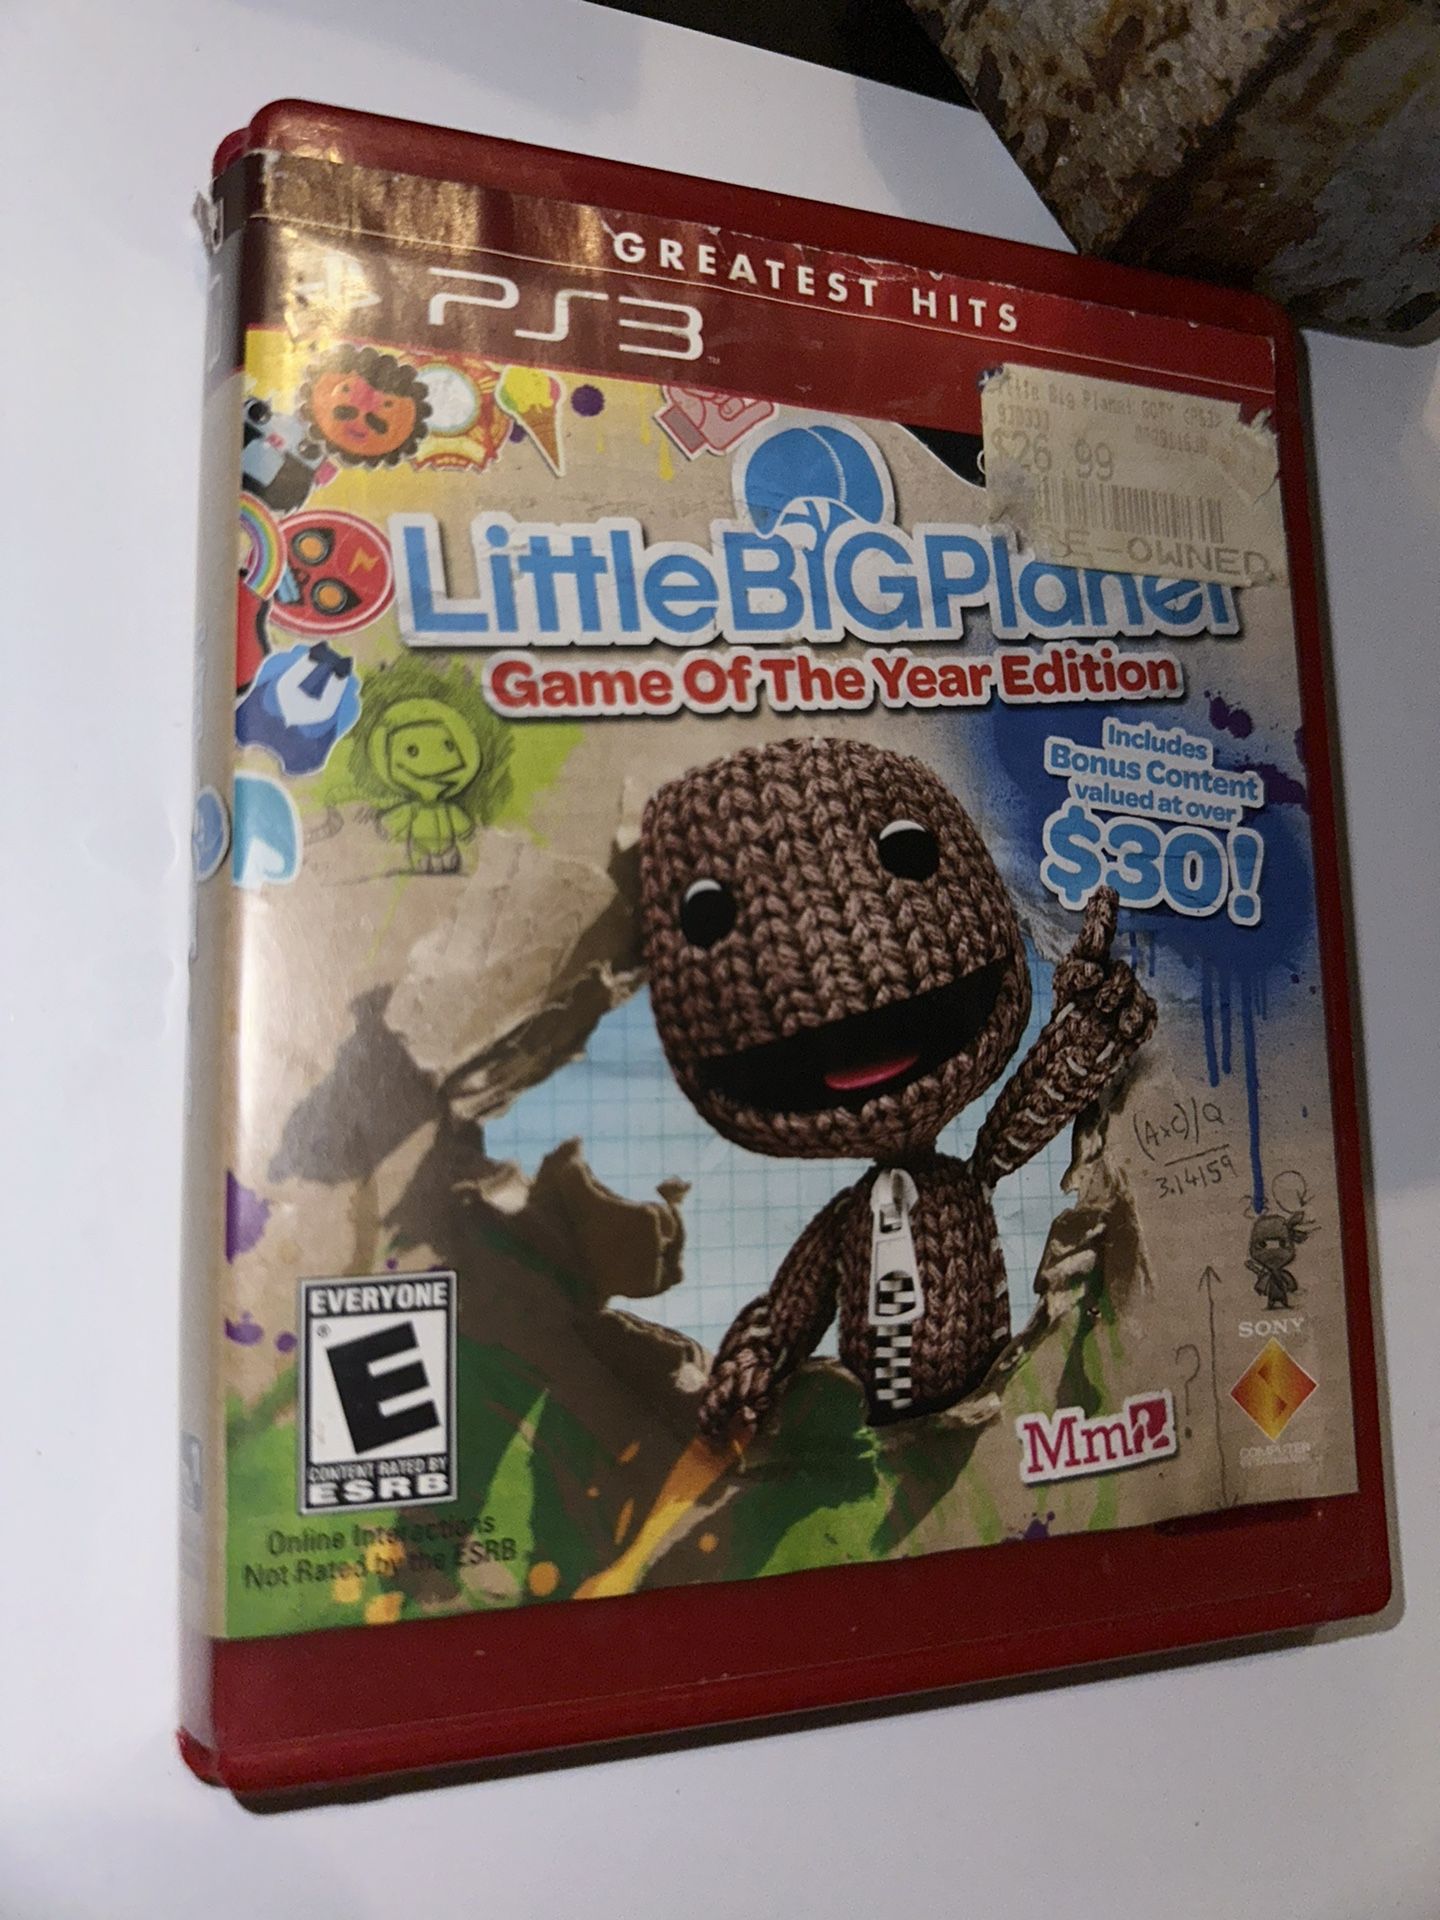 Little Big Planet: Game Of The Year Edition (Sony PS3 Playstation, no manual